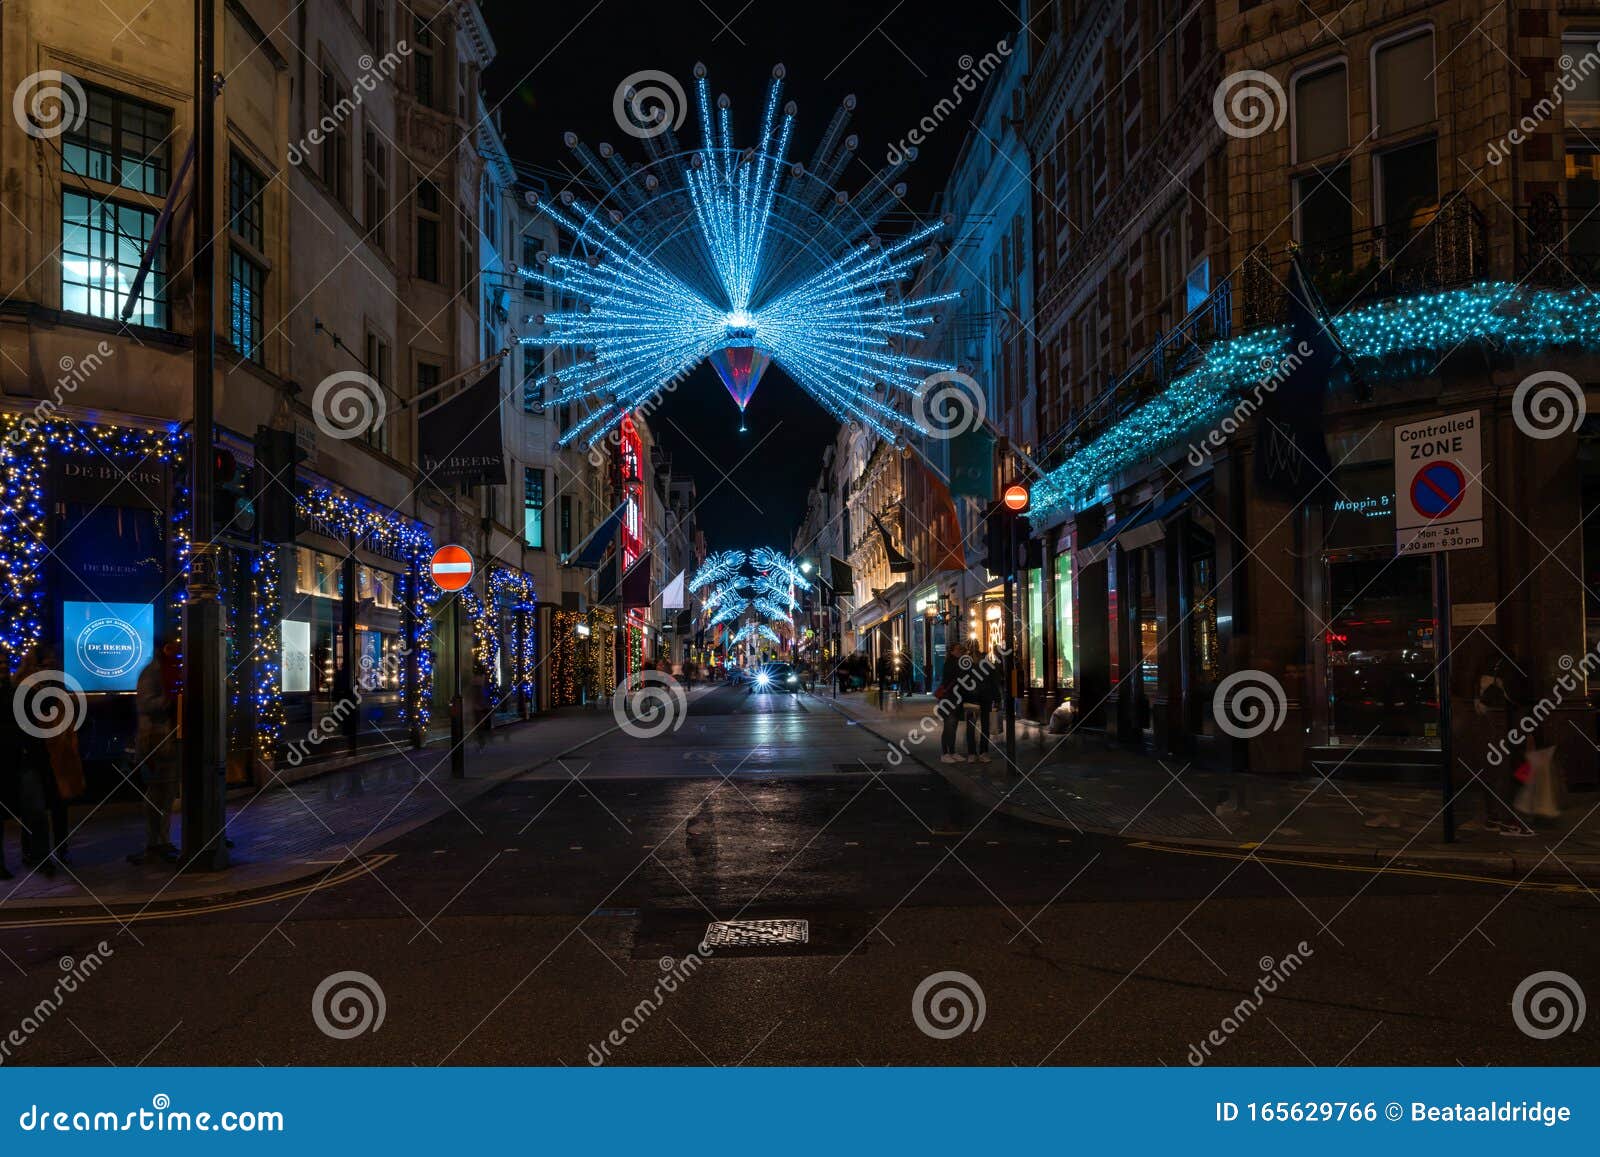 LONDON, UK - 23RD DECEMBER 2015: A View Down New Bond Street In London  During The Christmas Period Showing Building Exteriors, Decorations, People  And Traffic. Stock Photo, Picture and Royalty Free Image. Image 50394734.